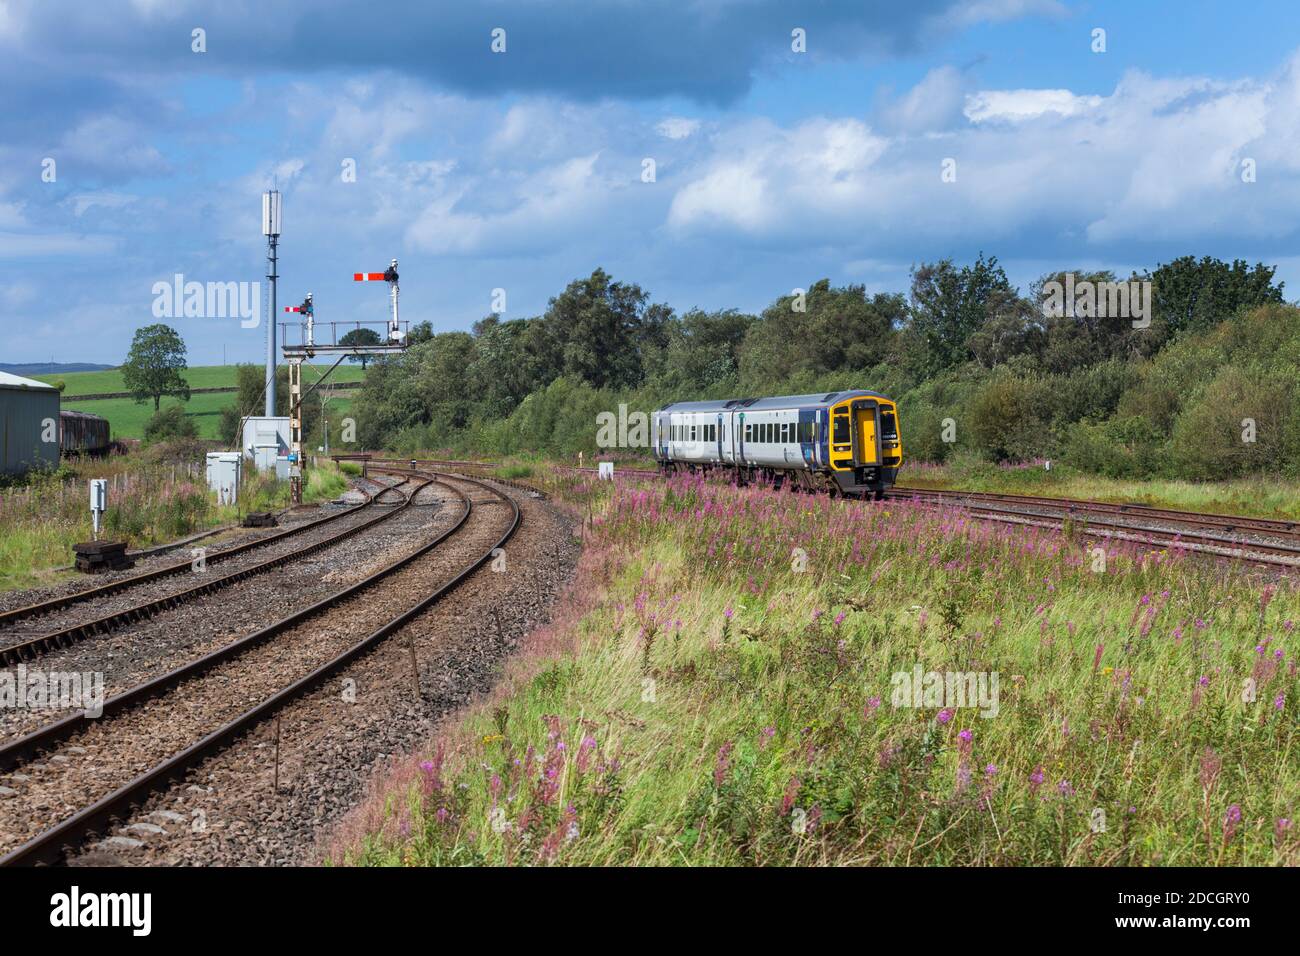 Northern Rail class 158 sprinter train 158909 arriving at  Hellifield, Yorkshire with rosebay willowherb and a large bracket semaphore signal Stock Photo